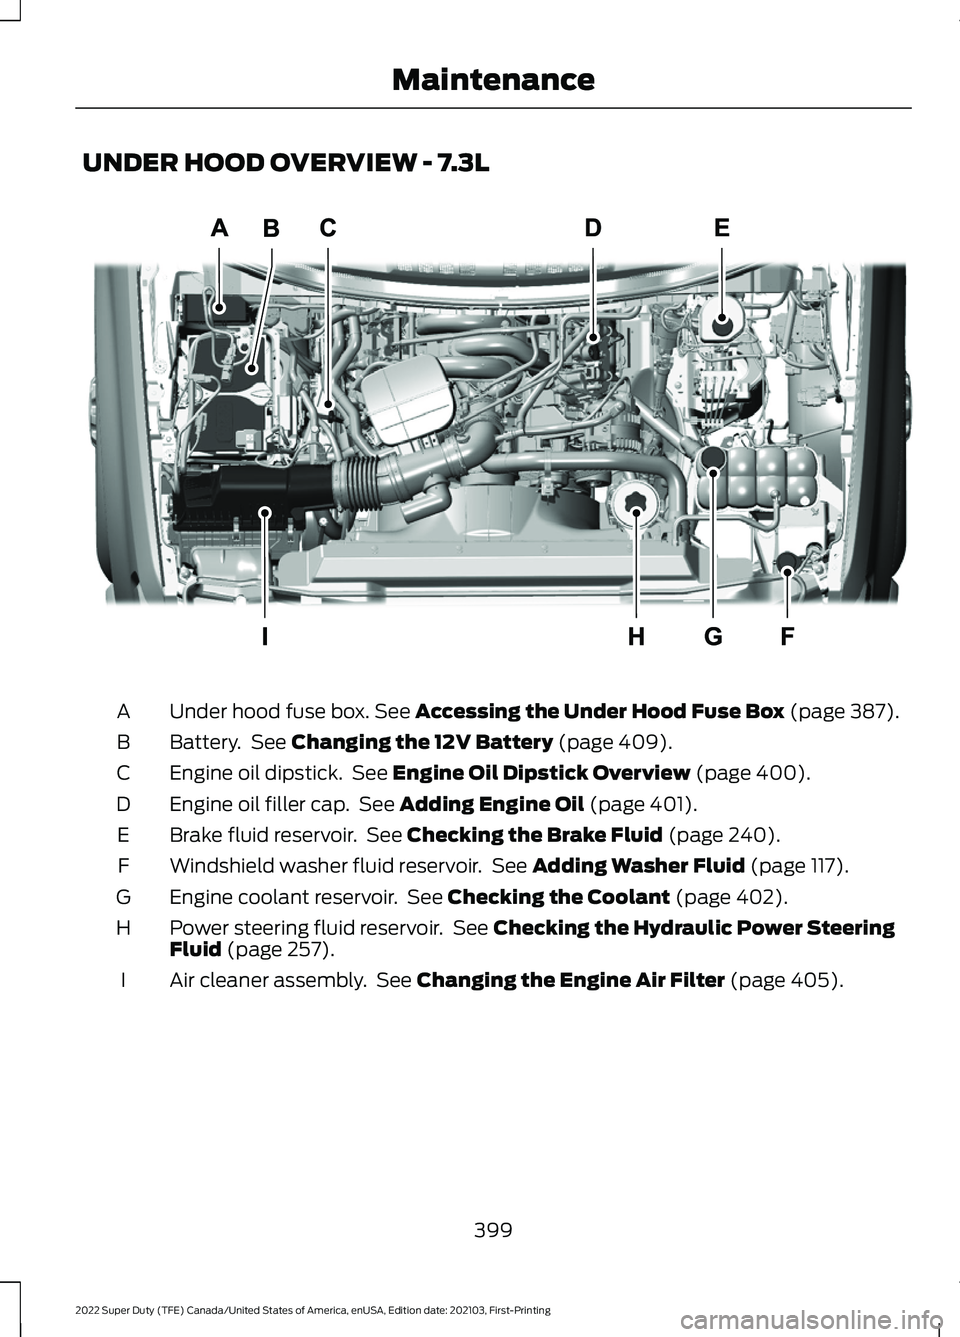 FORD F-600 2022  Owners Manual UNDER HOOD OVERVIEW - 7.3L
Under hood fuse box. See Accessing the Under Hood Fuse Box (page 387).
A
Battery.  See 
Changing the 12V Battery (page 409).
B
Engine oil dipstick.  See 
Engine Oil Dipstick